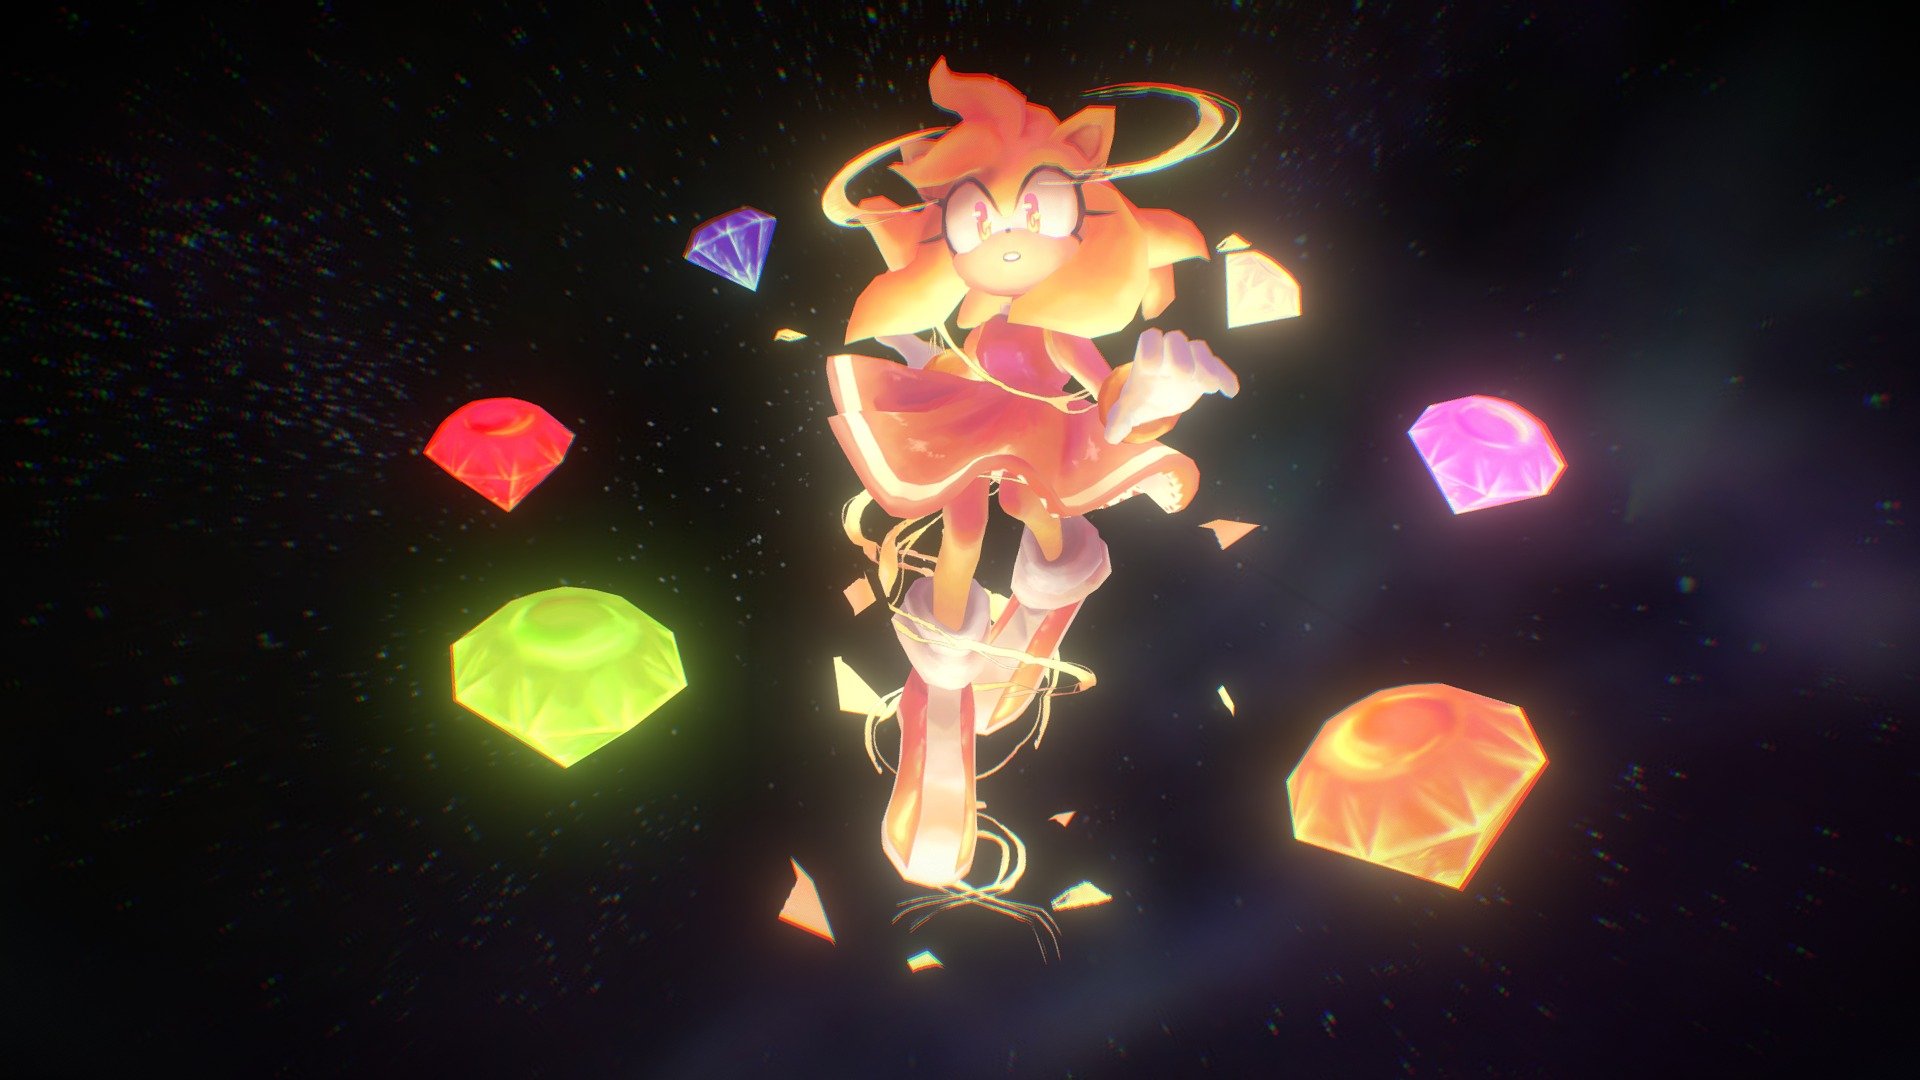 Worked on an out of this world concept!! Amy deserves a turn with the chaos emeralds💎✨
Concept art by @spacecolonie https://twitter.com/spacecolonie/status/1253535862954119168?s=2

Skydomes/environments arent my speciality so I used the Space Skies plugin from Unity as the base! https://twitter.com/Courtney_Fay_M/status/1293657116440514560?s=20 - Super Amy Rose - 3D model by CourtneyFayM (@CourtneyFairytaleArt) 3d model